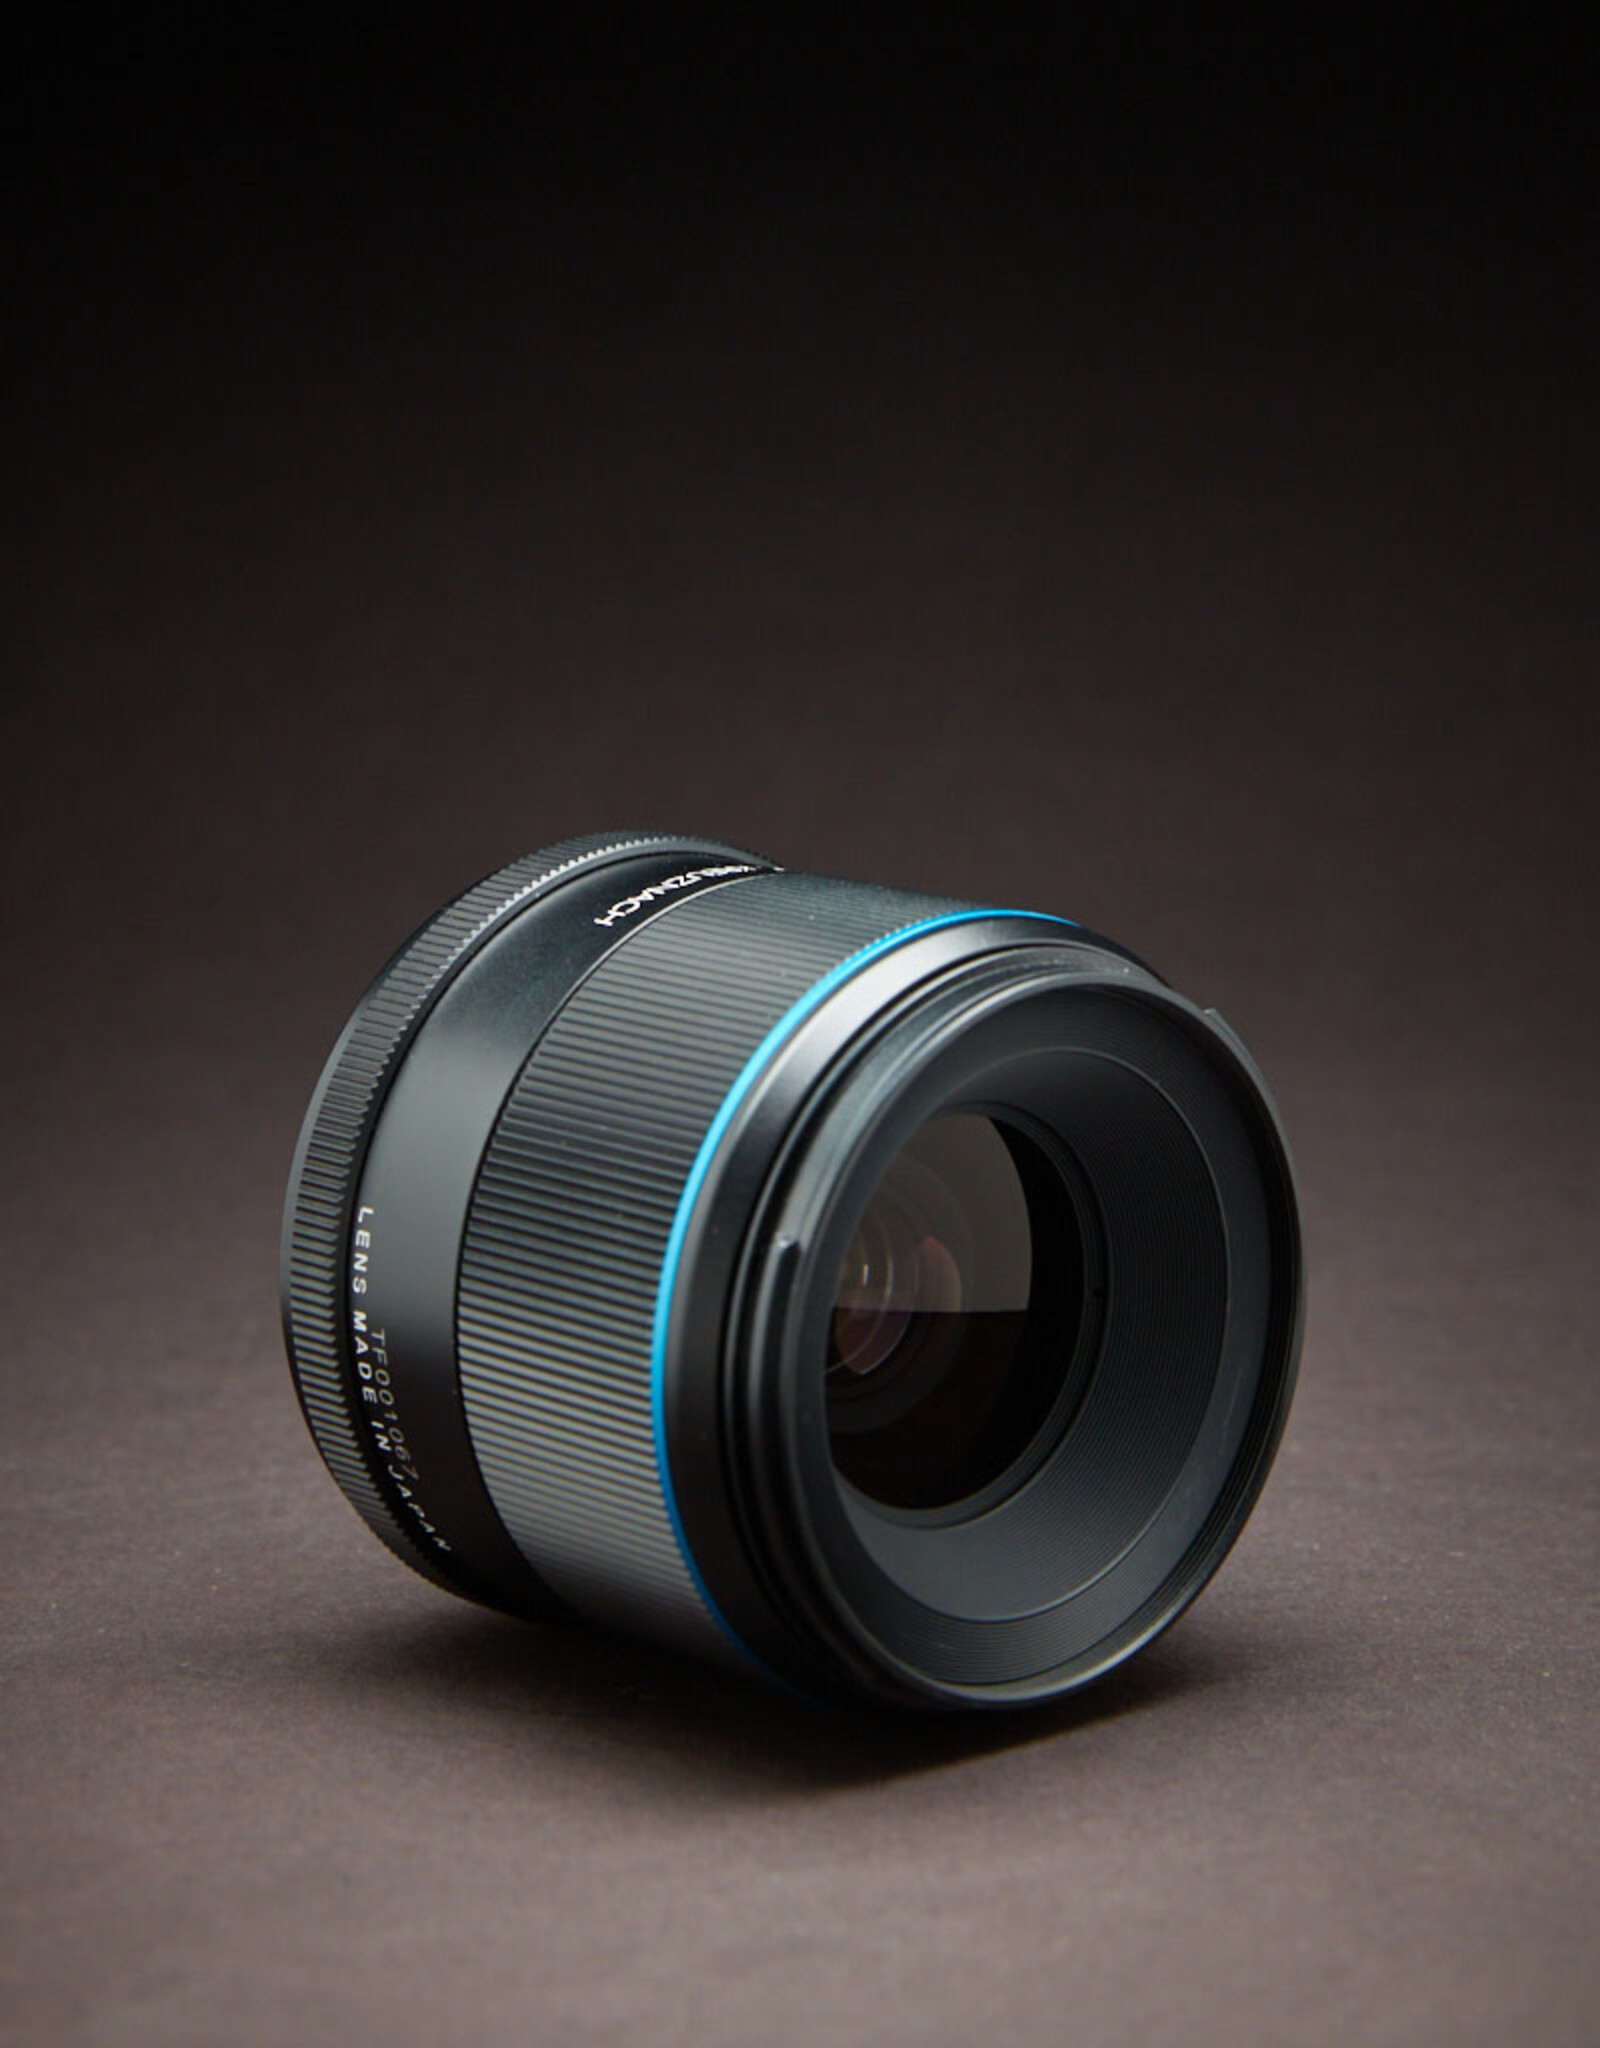 Phase One USED - Phase One Schneider Kreuznach 55mm 2.8 Blue Ring Lens with hood, caps and original box. Condition 9.